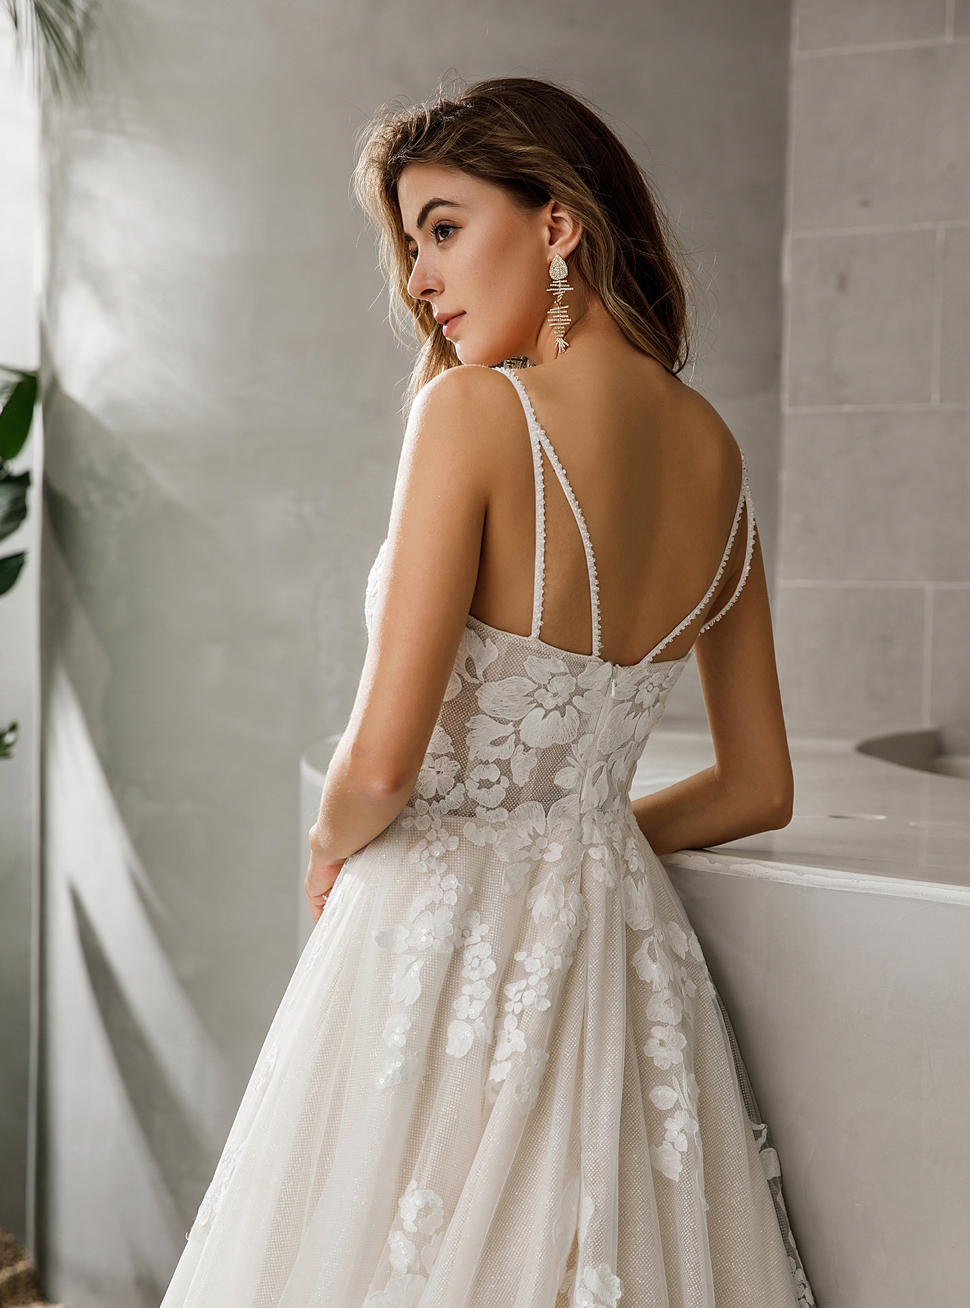 Simple A-Line Wedding Dress with Floral Lace Bodice